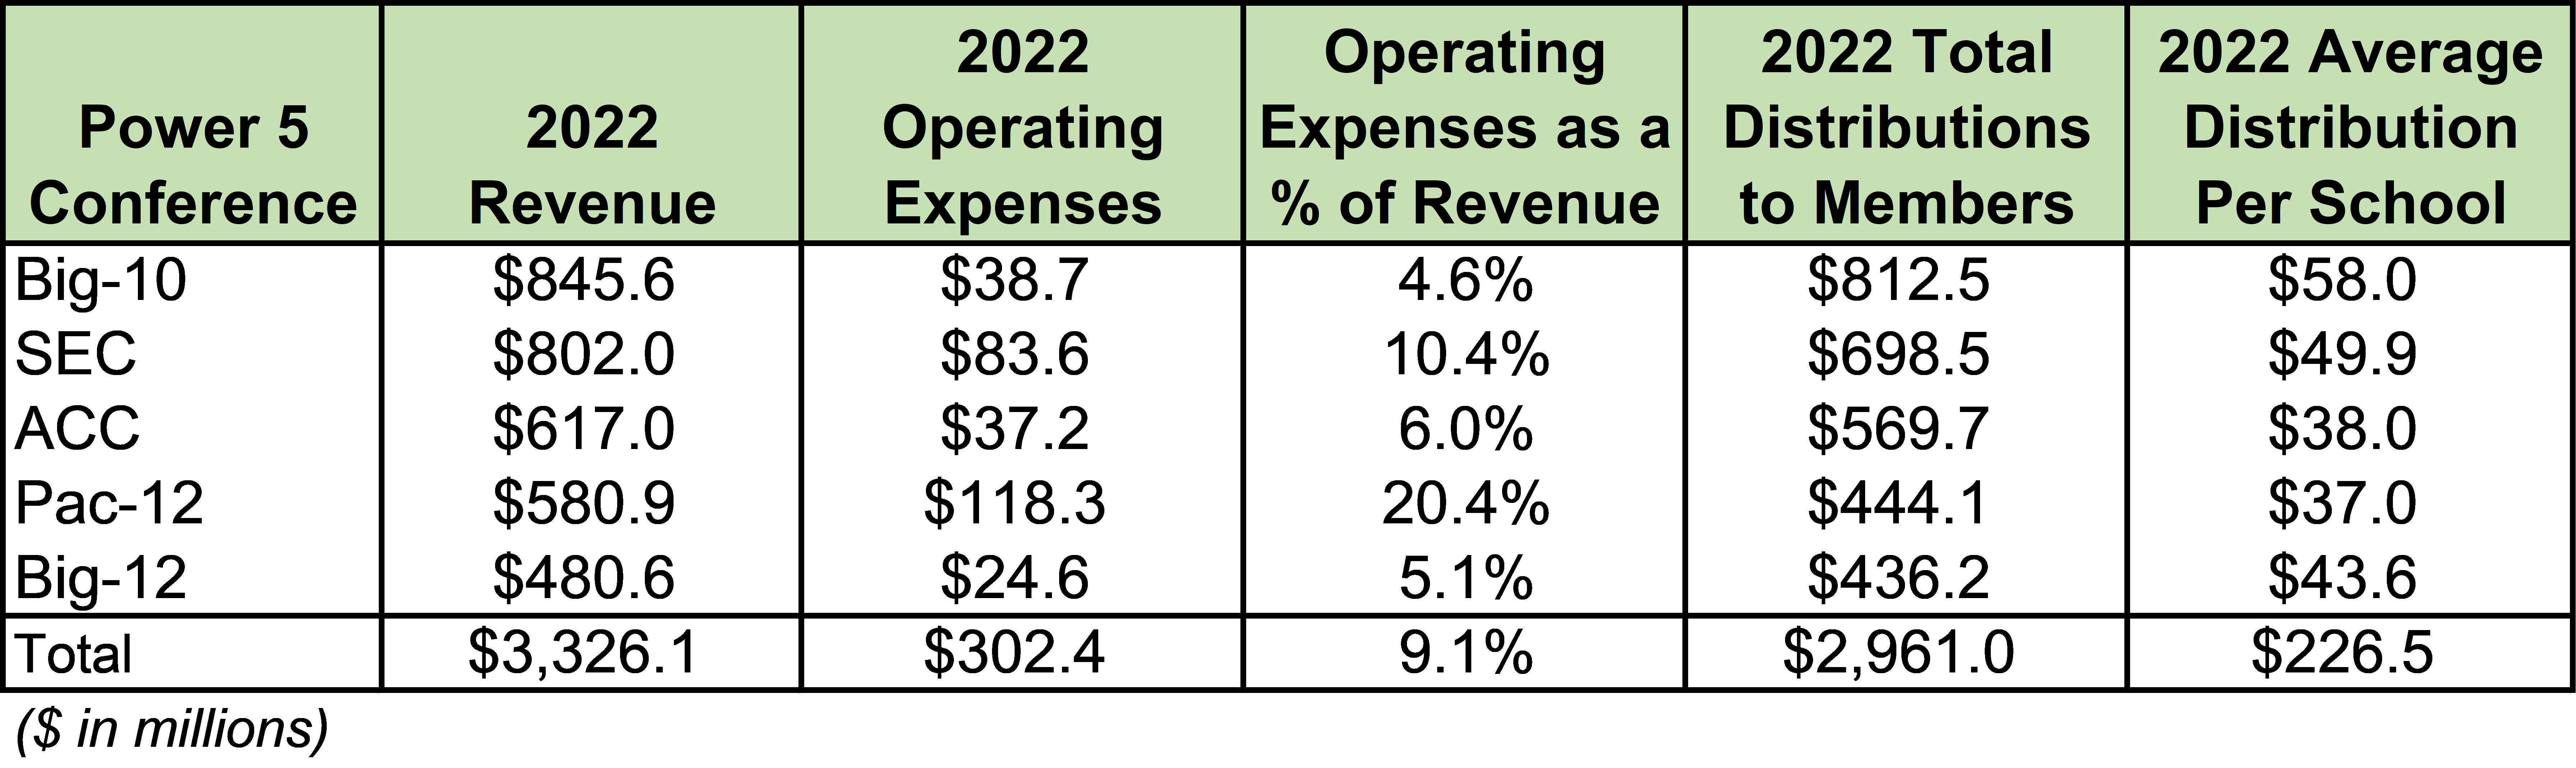 Conferences revenues and expenses 2022